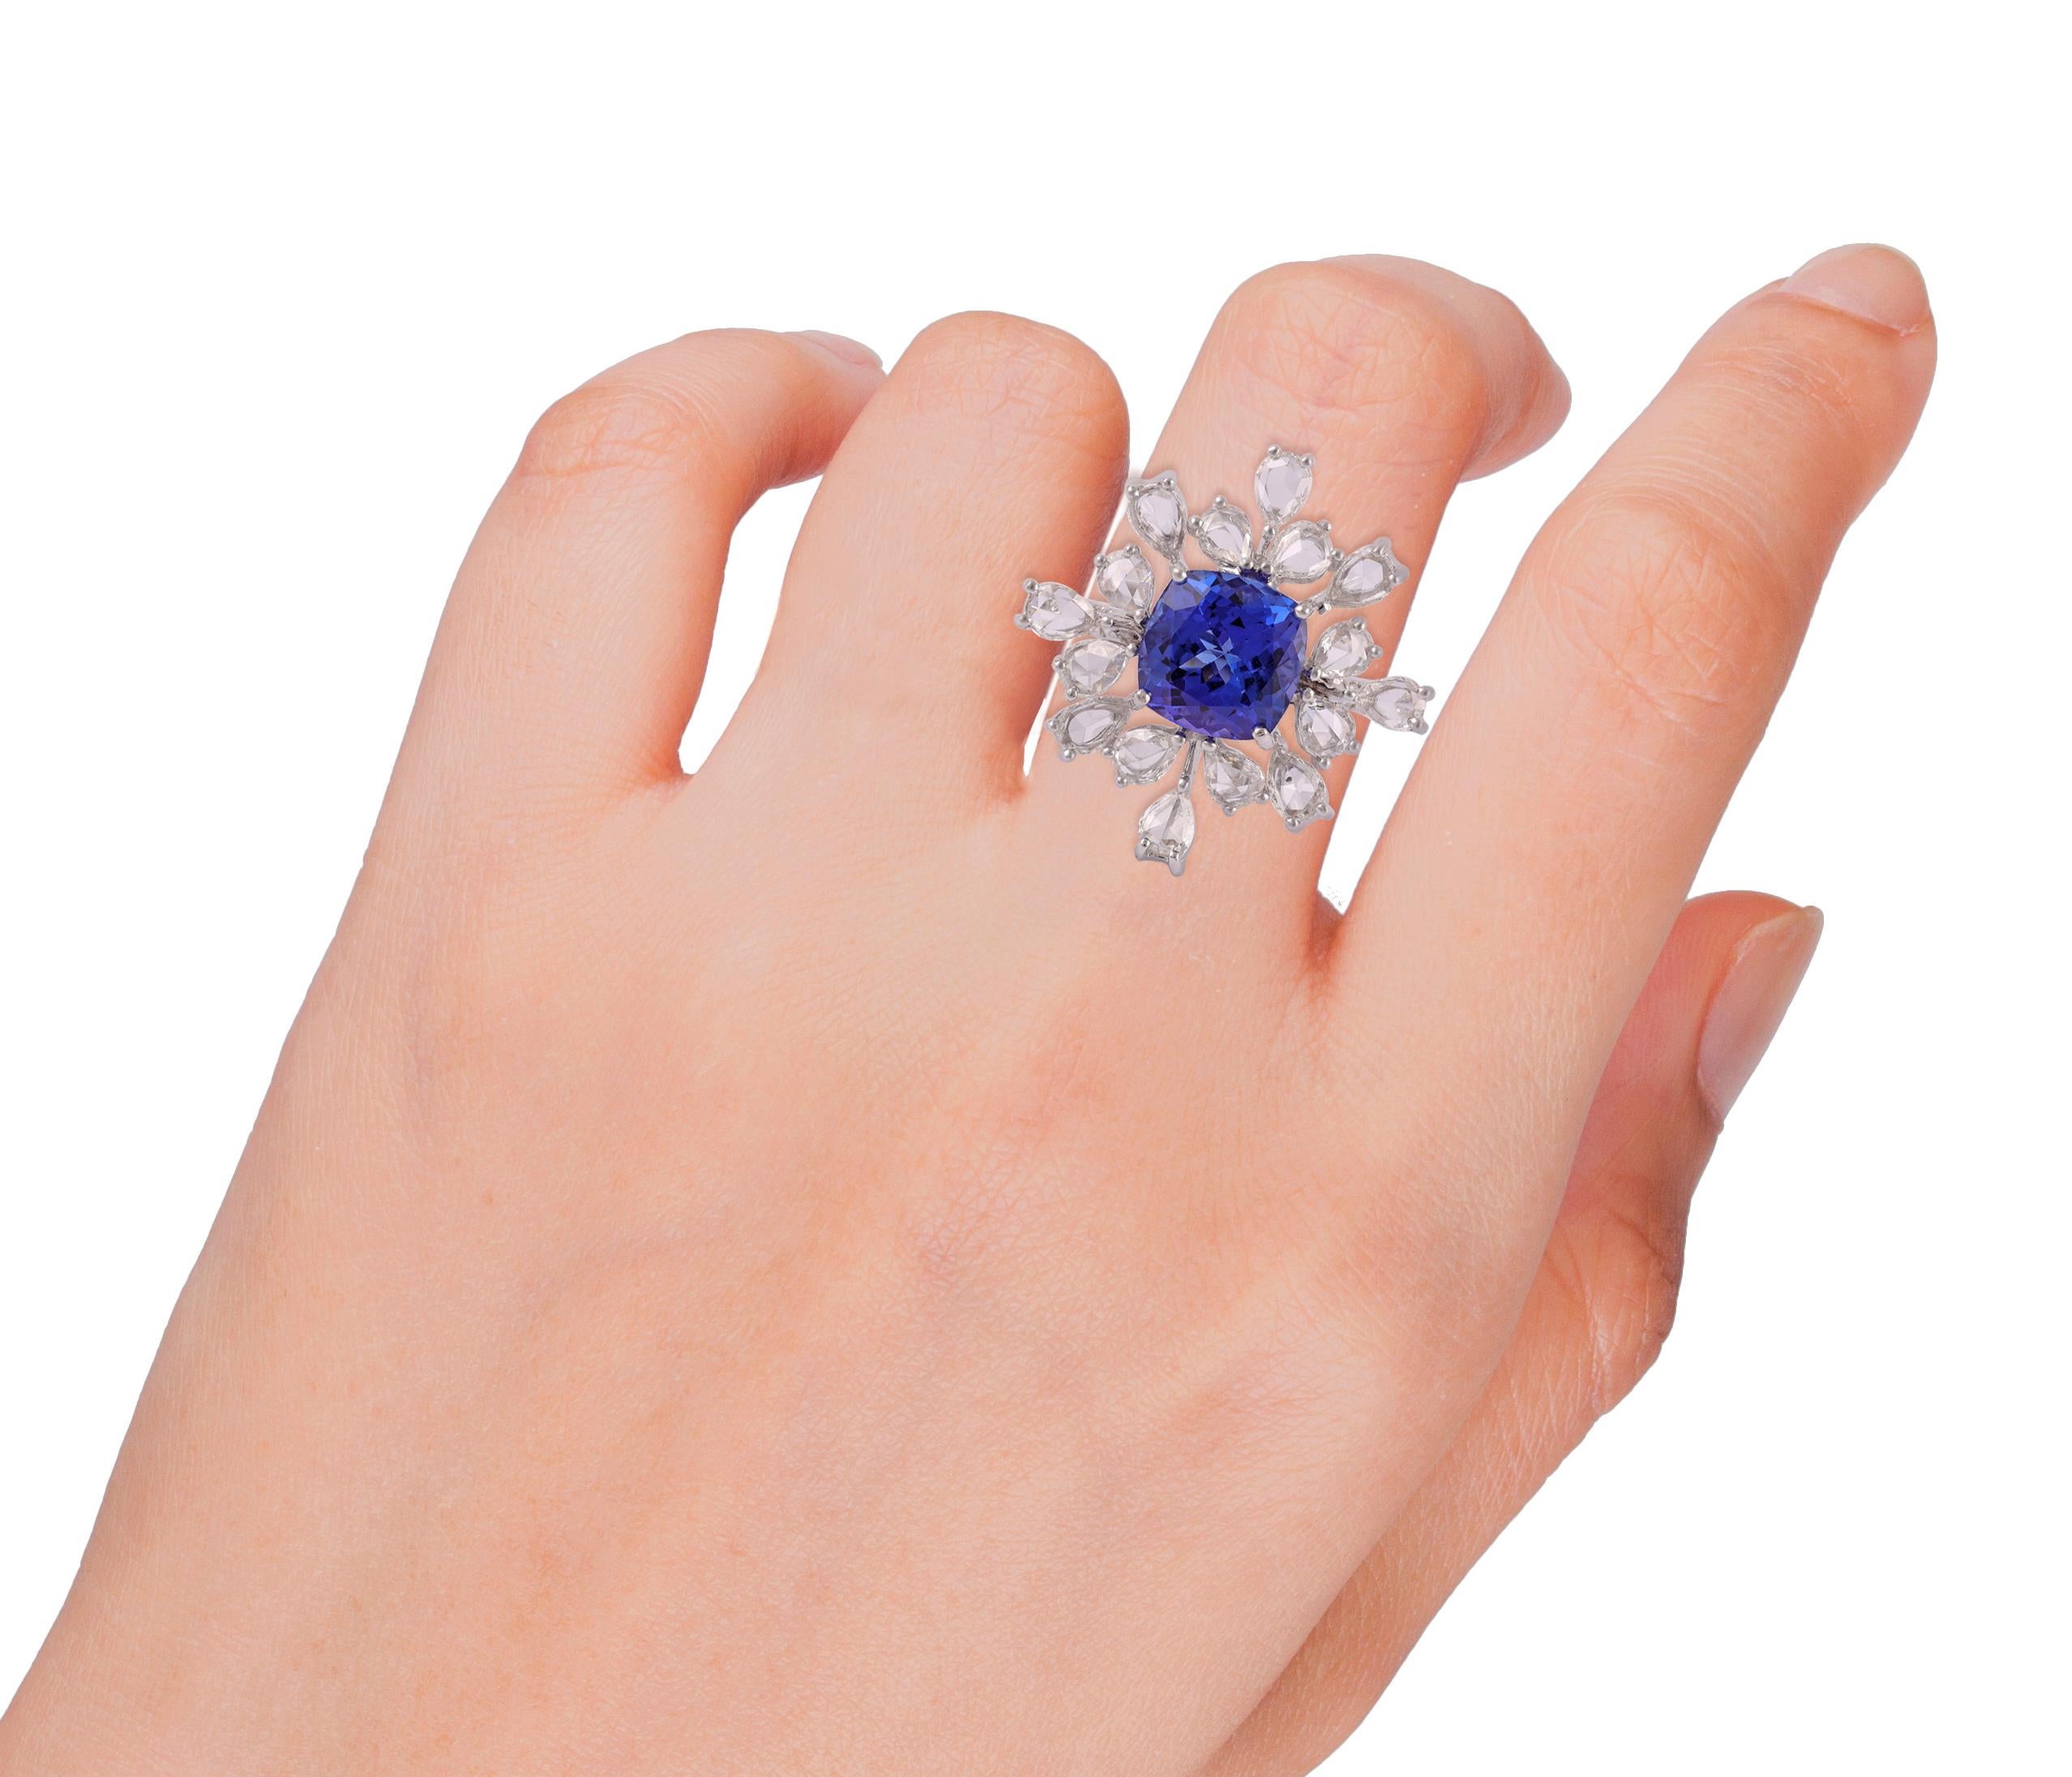  3.62 Carats Natural Tanzanite and Diamond Cocktail Ring 18k White Gold In New Condition For Sale In Jaipur, Rajasthan